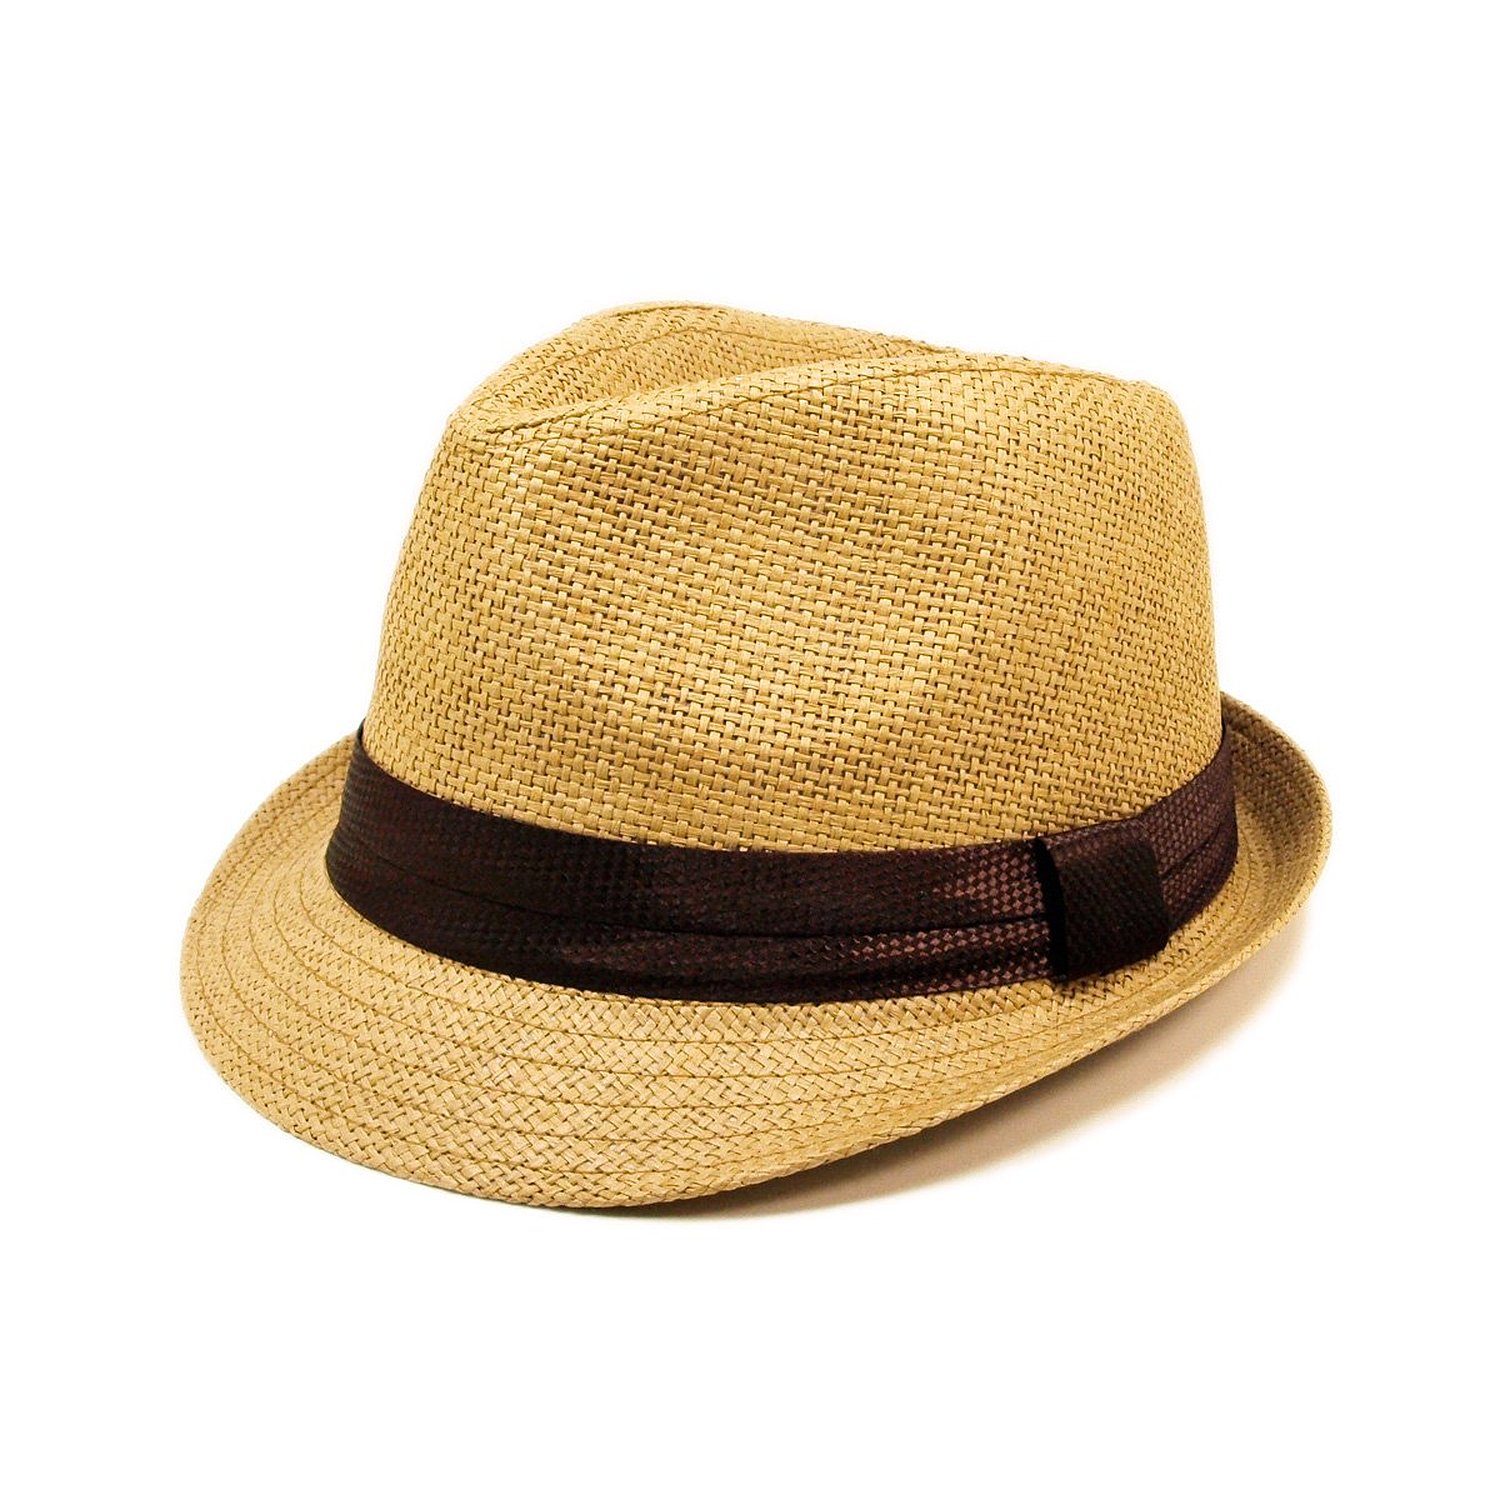 Fedora Hat - Natural Color Straw with Black Band